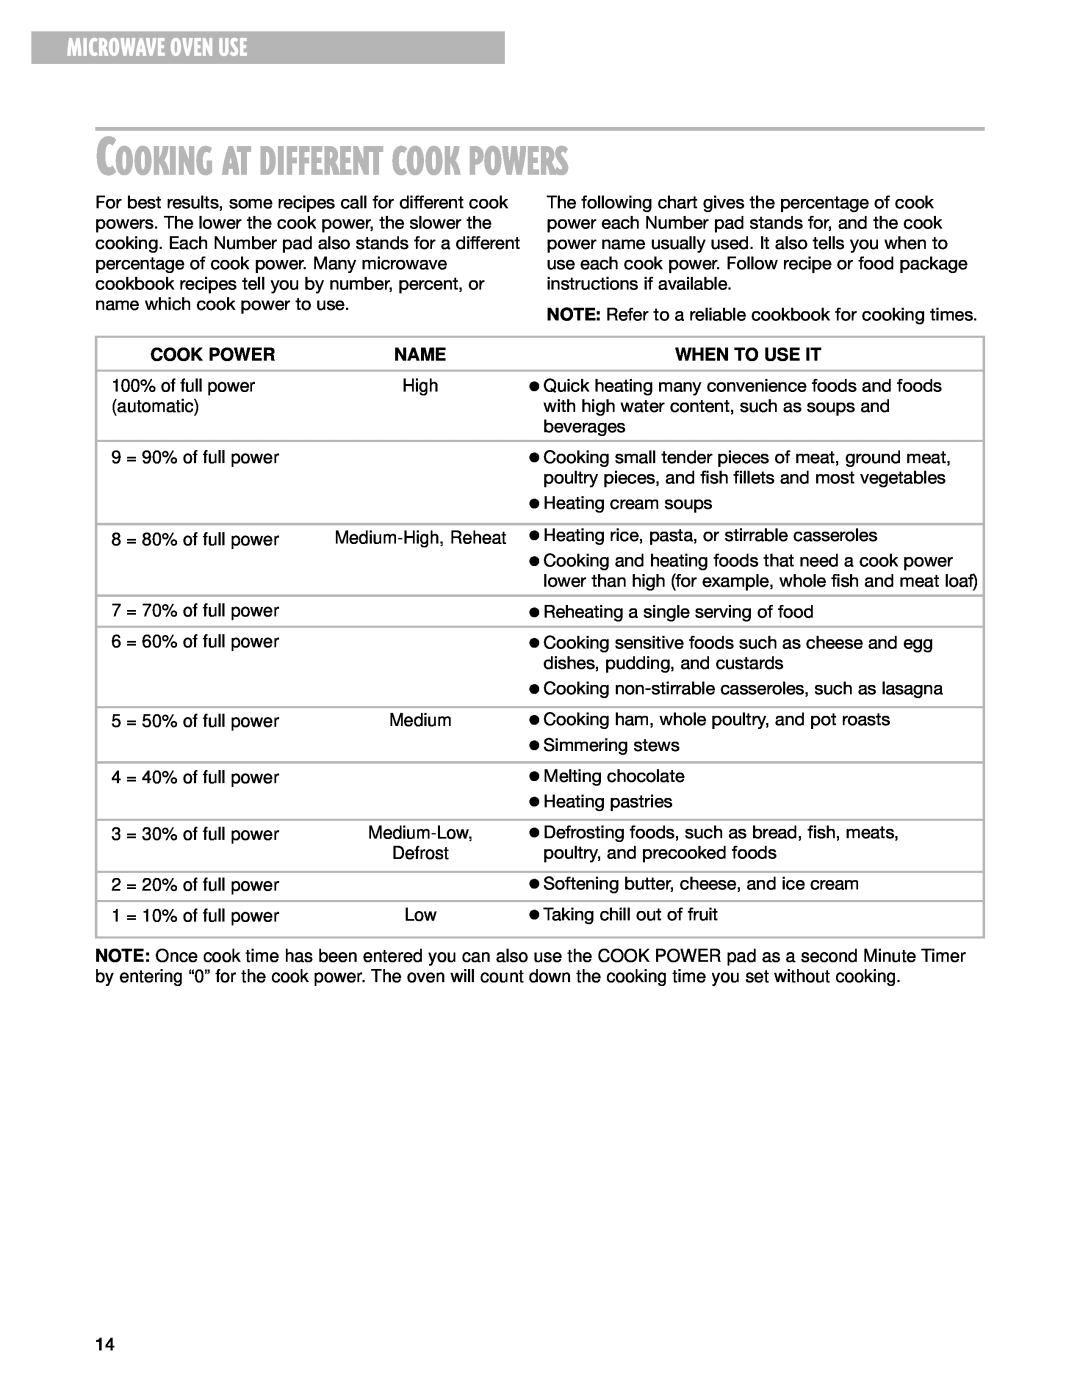 Whirlpool MT1111SK installation instructions Cooking At Different Cook Powers, Microwave Oven Use, Name, When To Use It 